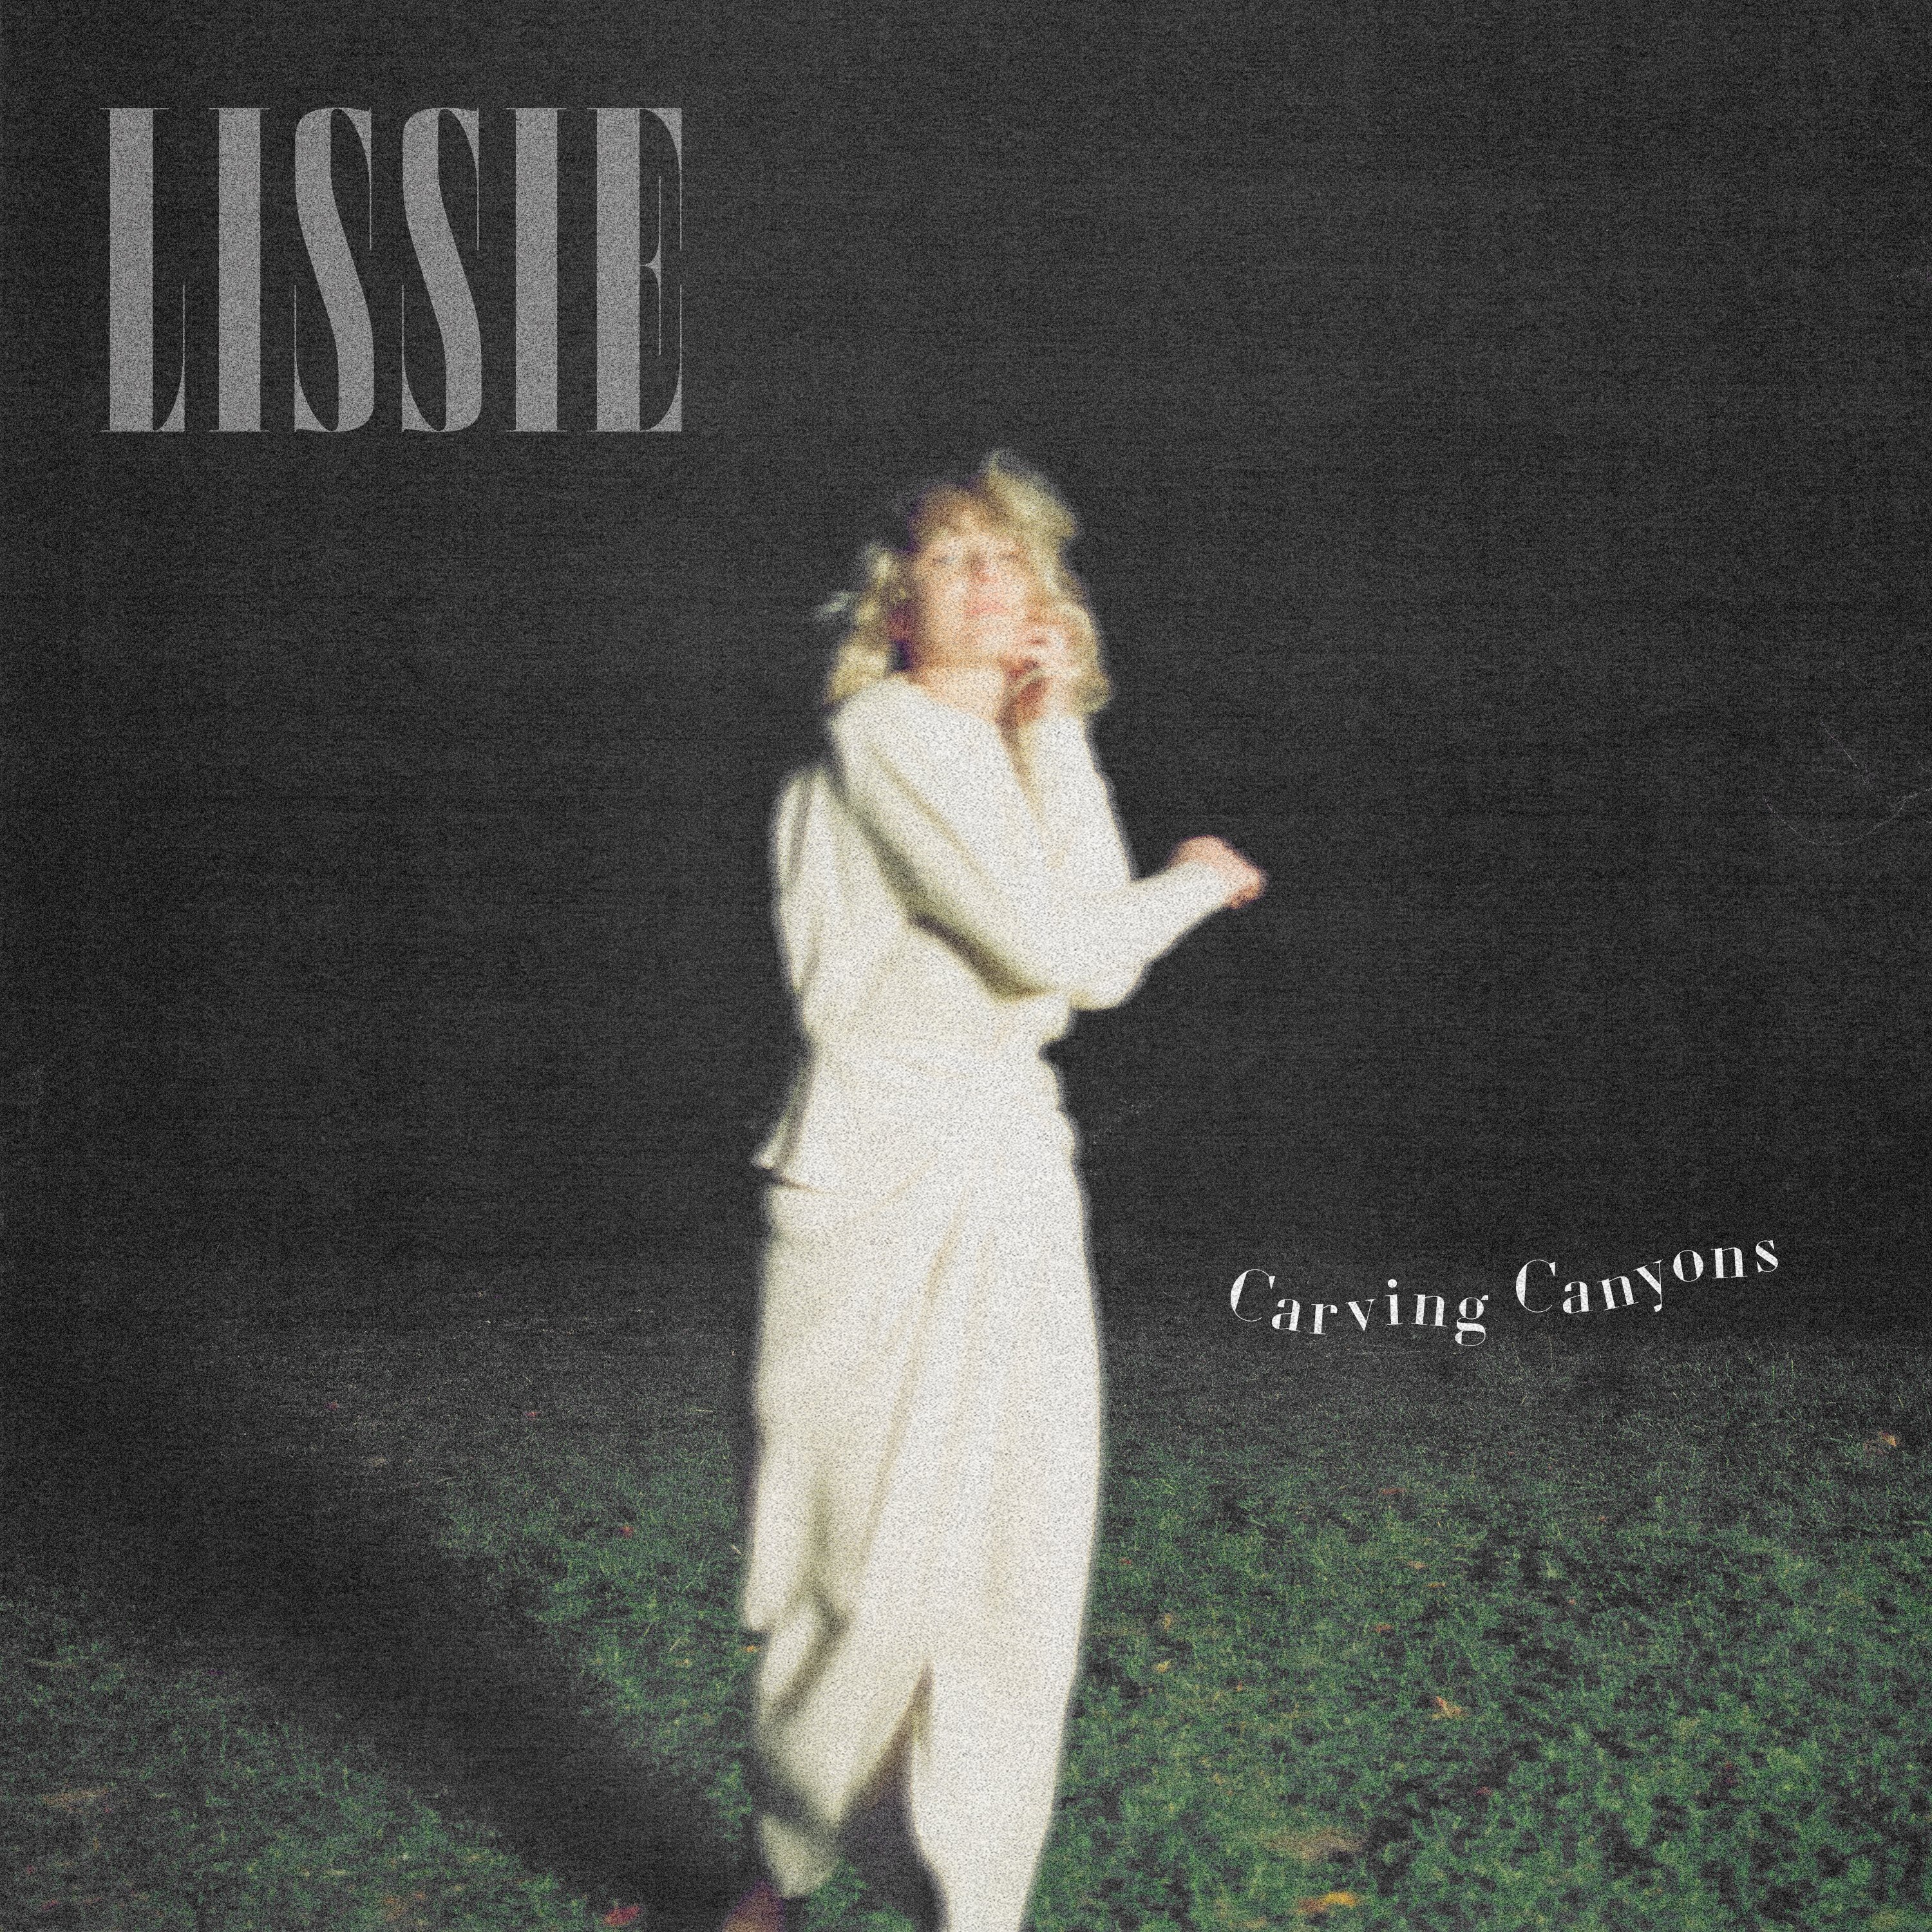 Lissie-Carving Canyons-CD-FLAC-2022-PERFECT